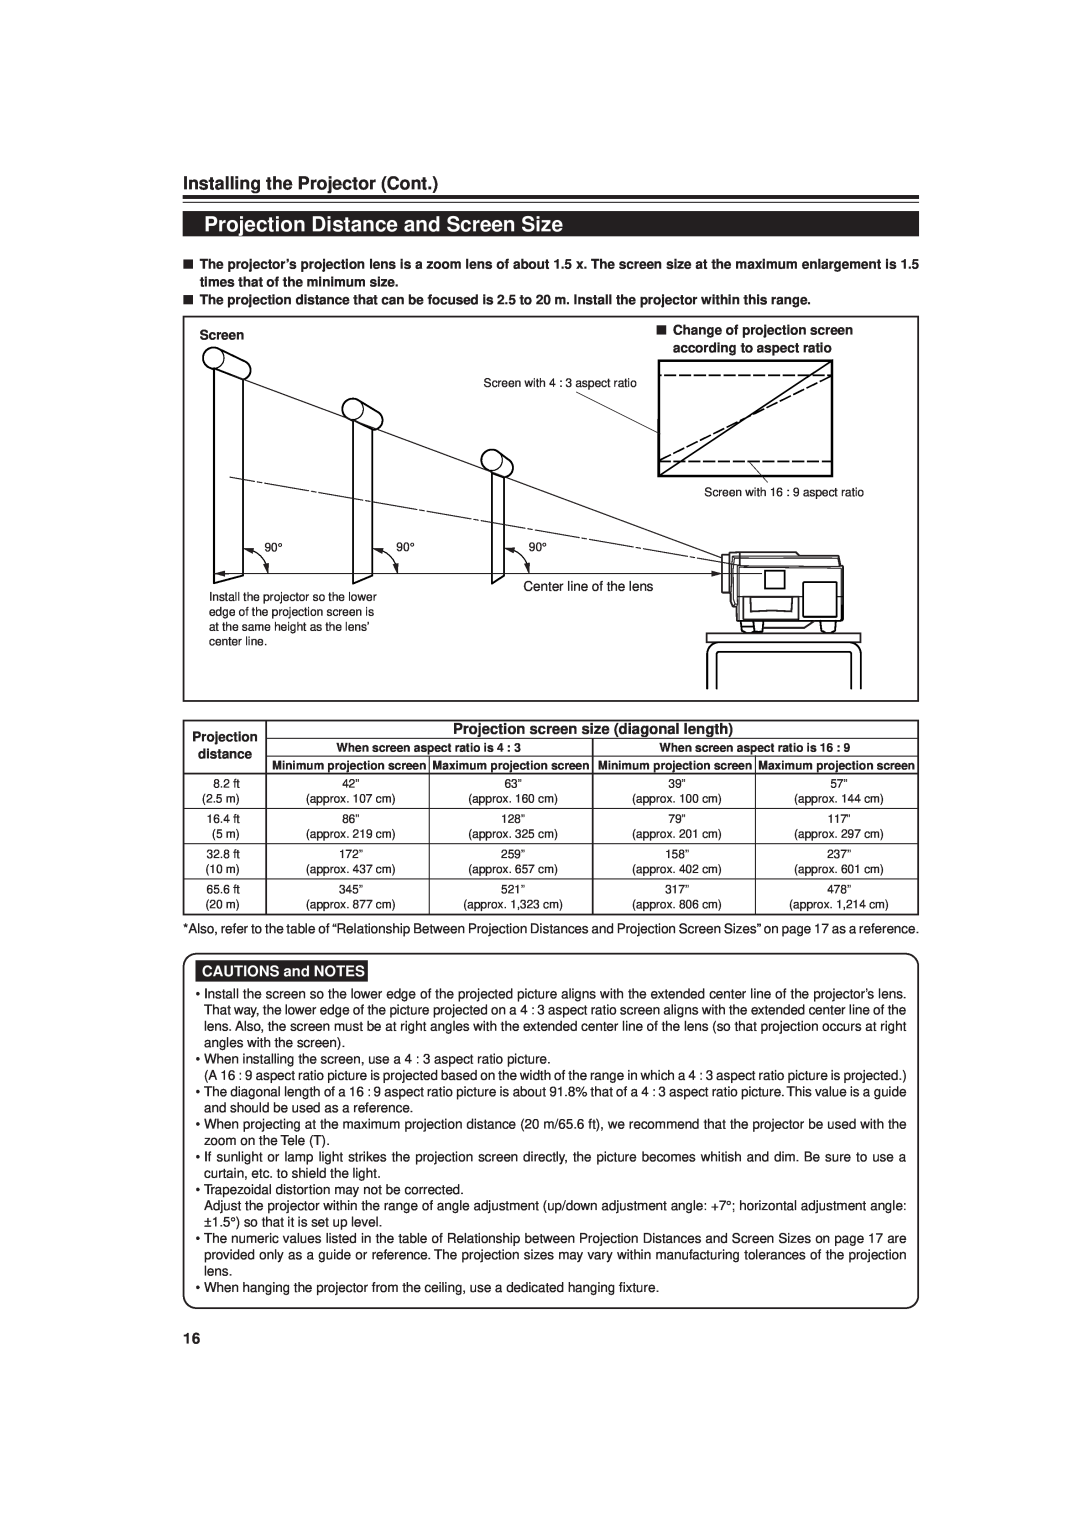 JVC DLA-G20U Projection Distance and Screen Size, Installing the Projector Cont, Projection screen size diagonal length 